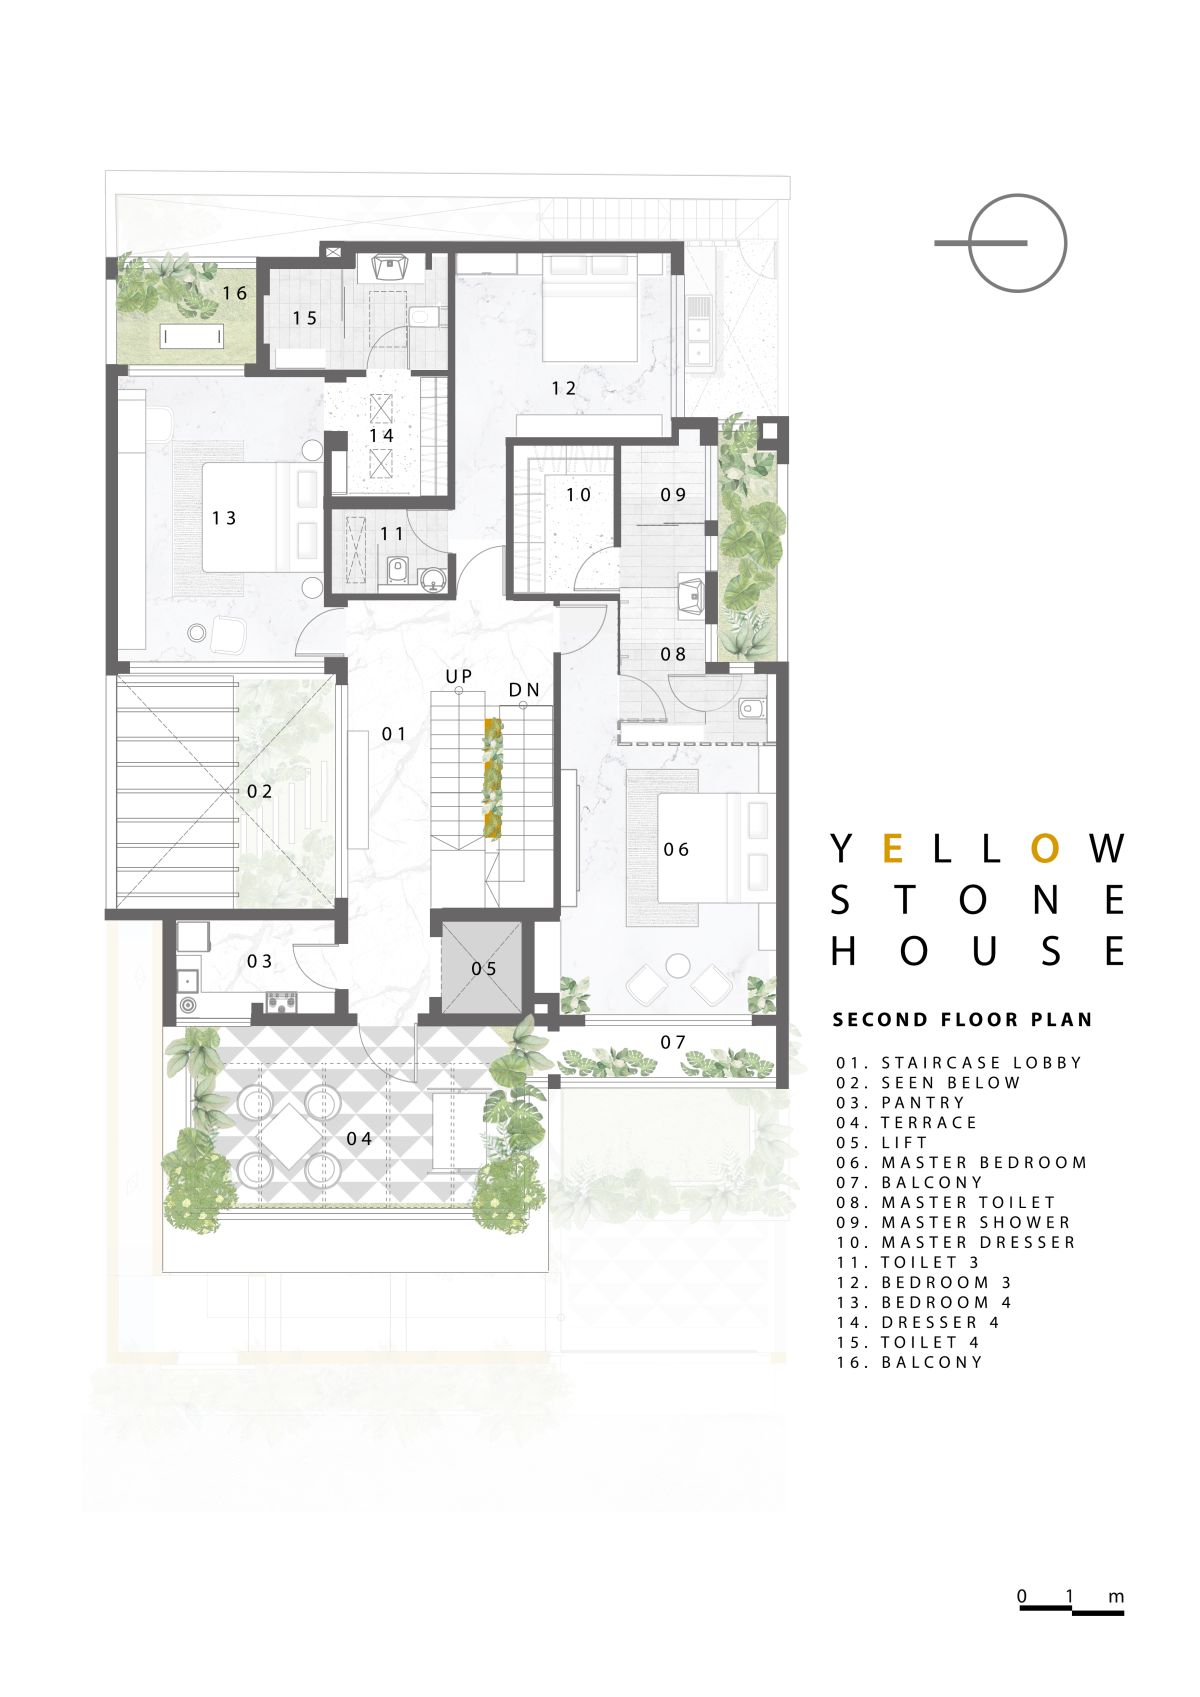 Yellow Stone House, at Indore, by Span Architects 62